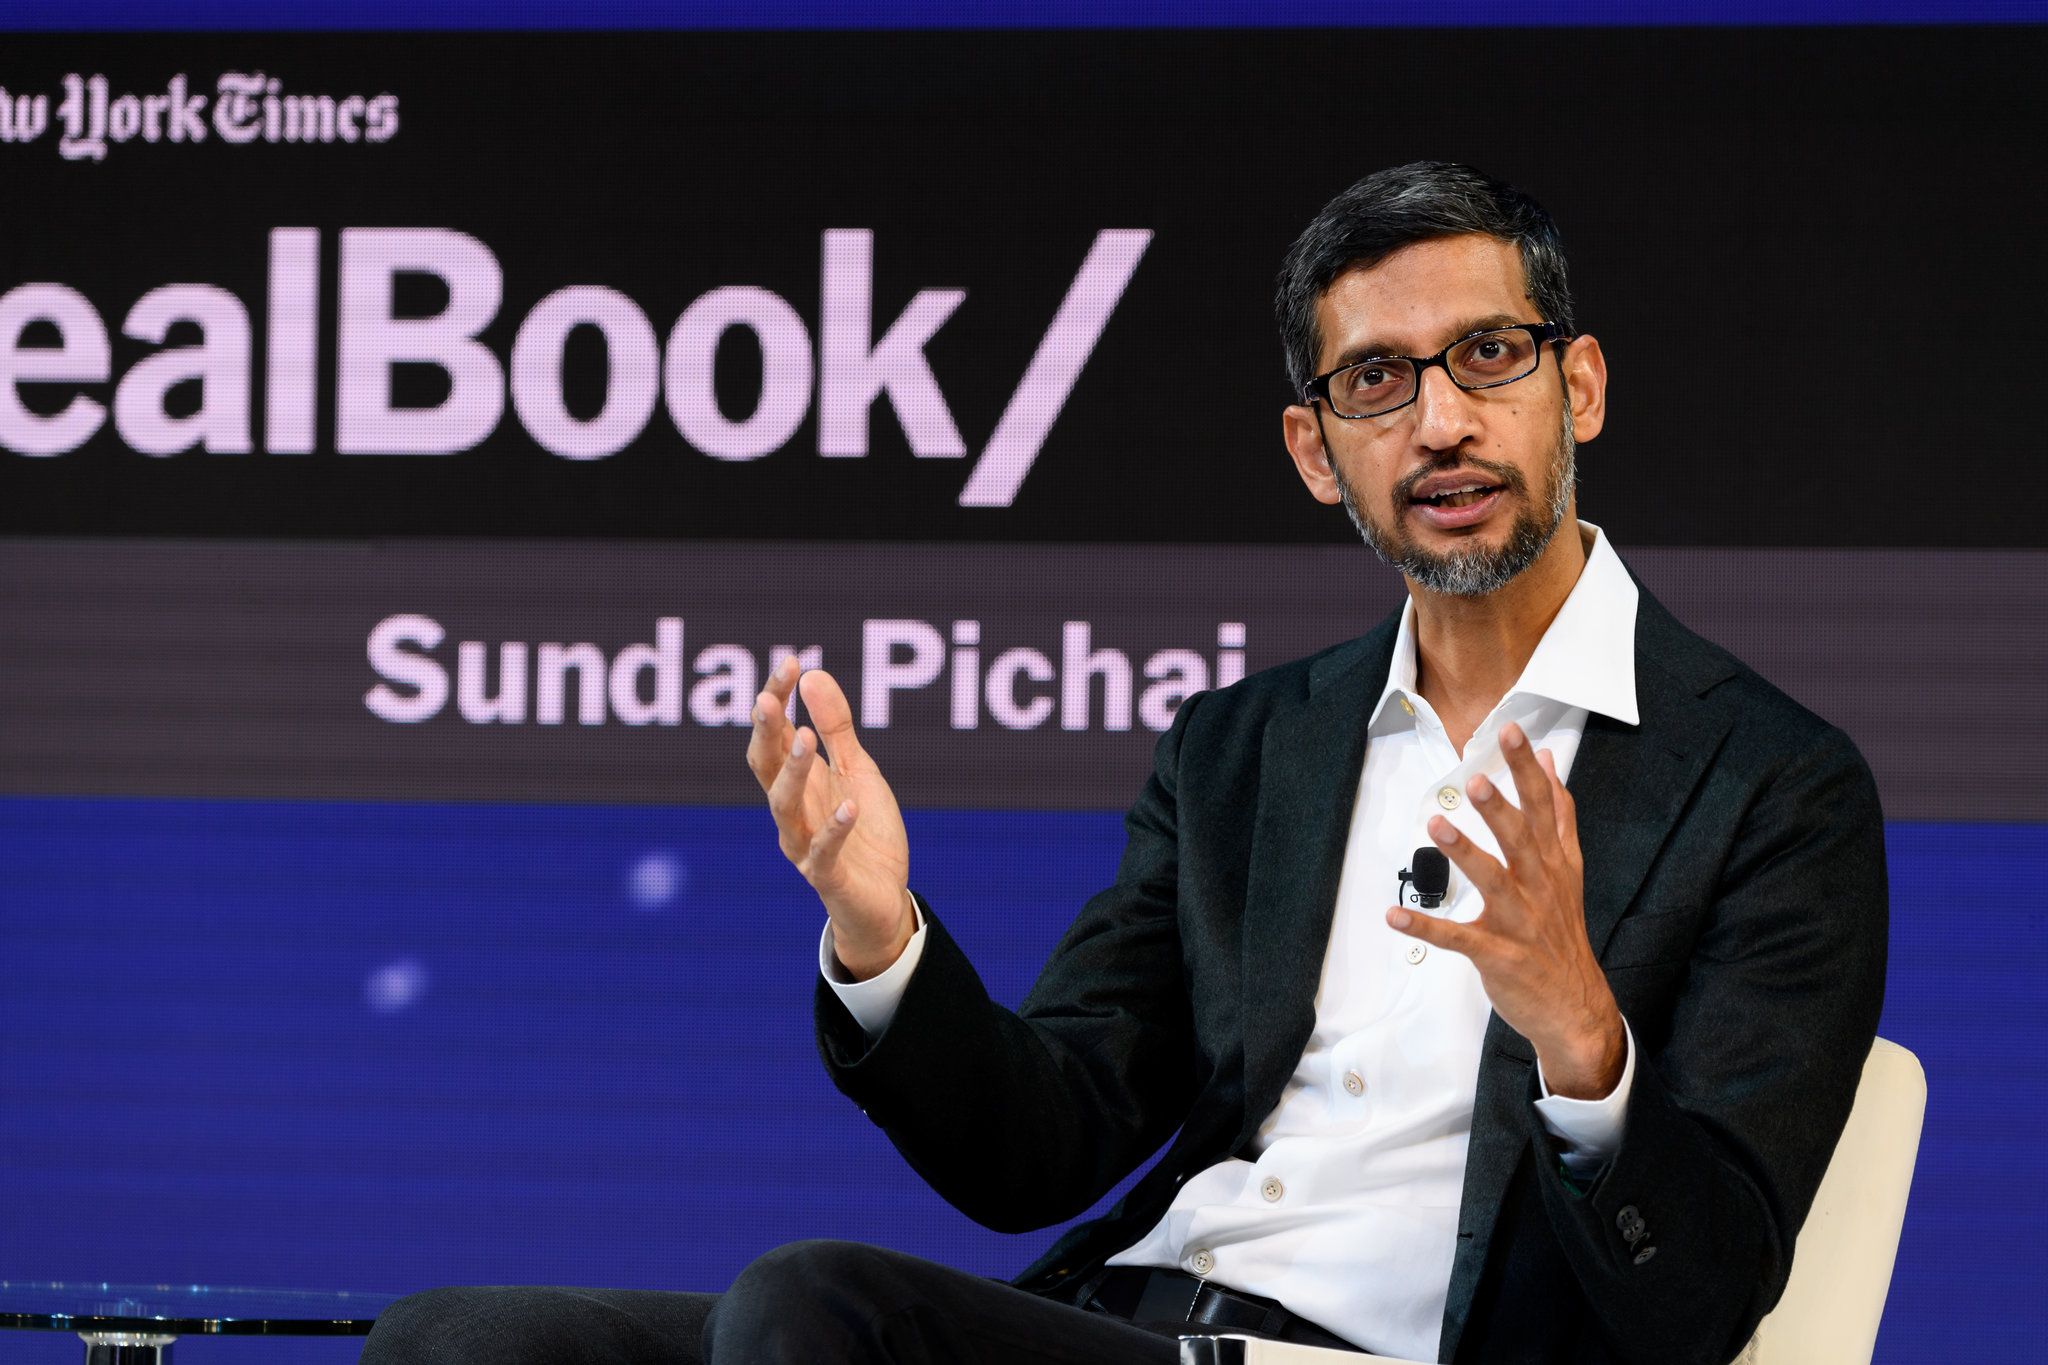 DealBook: Google's Founders to Step Aside, Ending an Era New